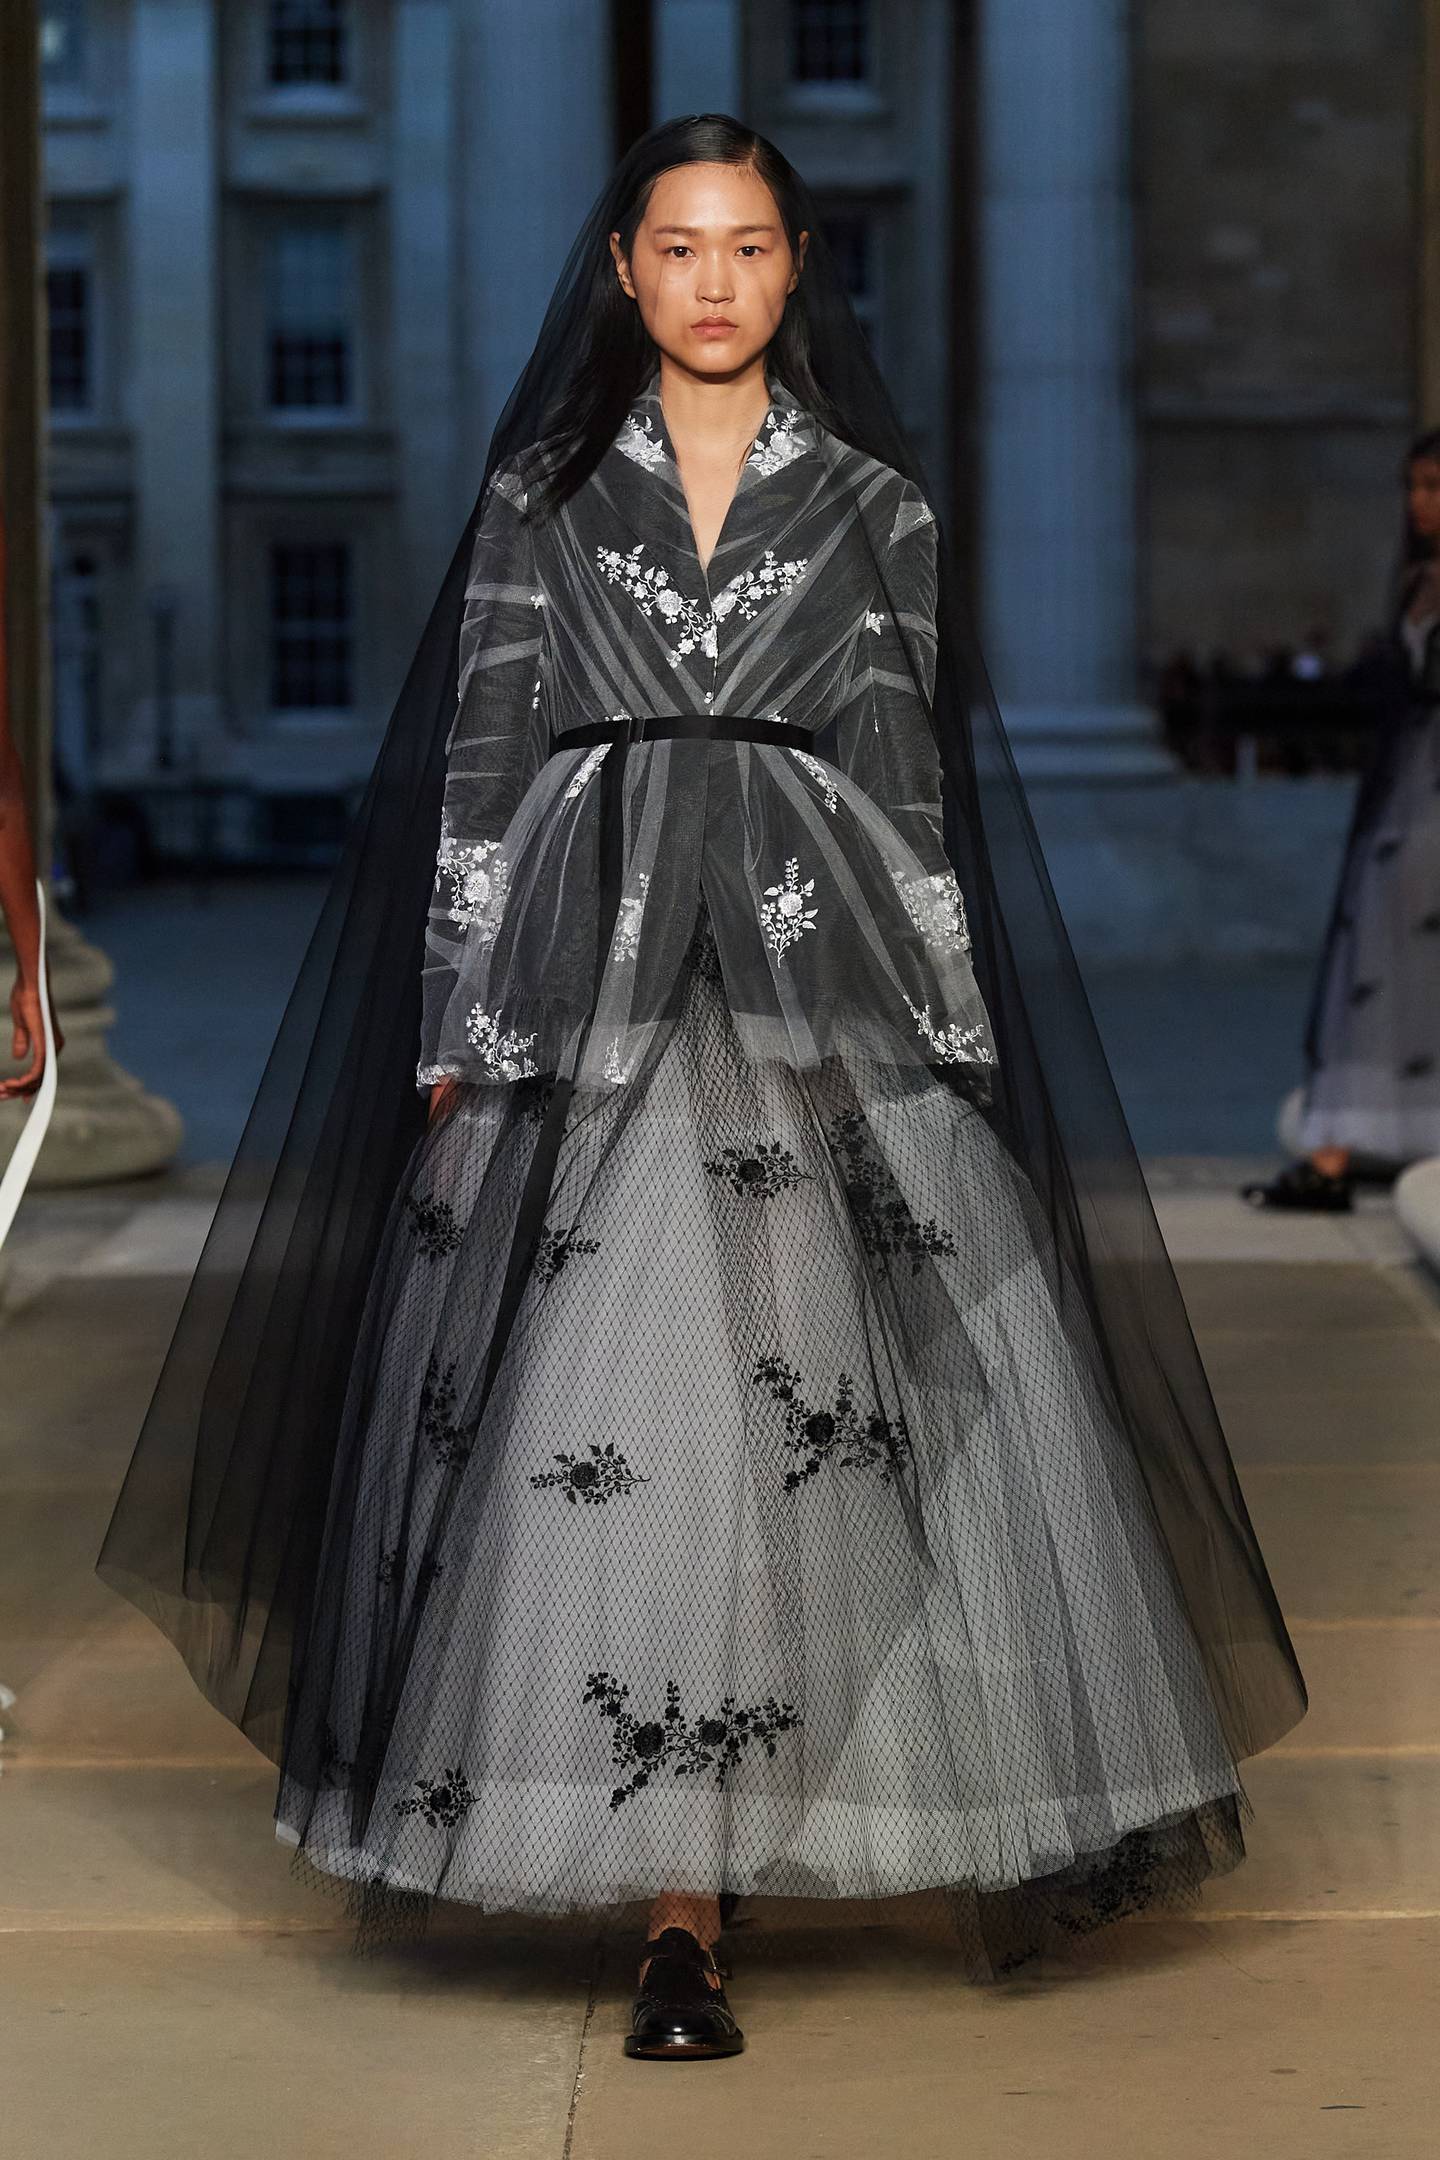 A complete look with a skirt finished with embroidery and veil at Erdem.  Photo: Erdem